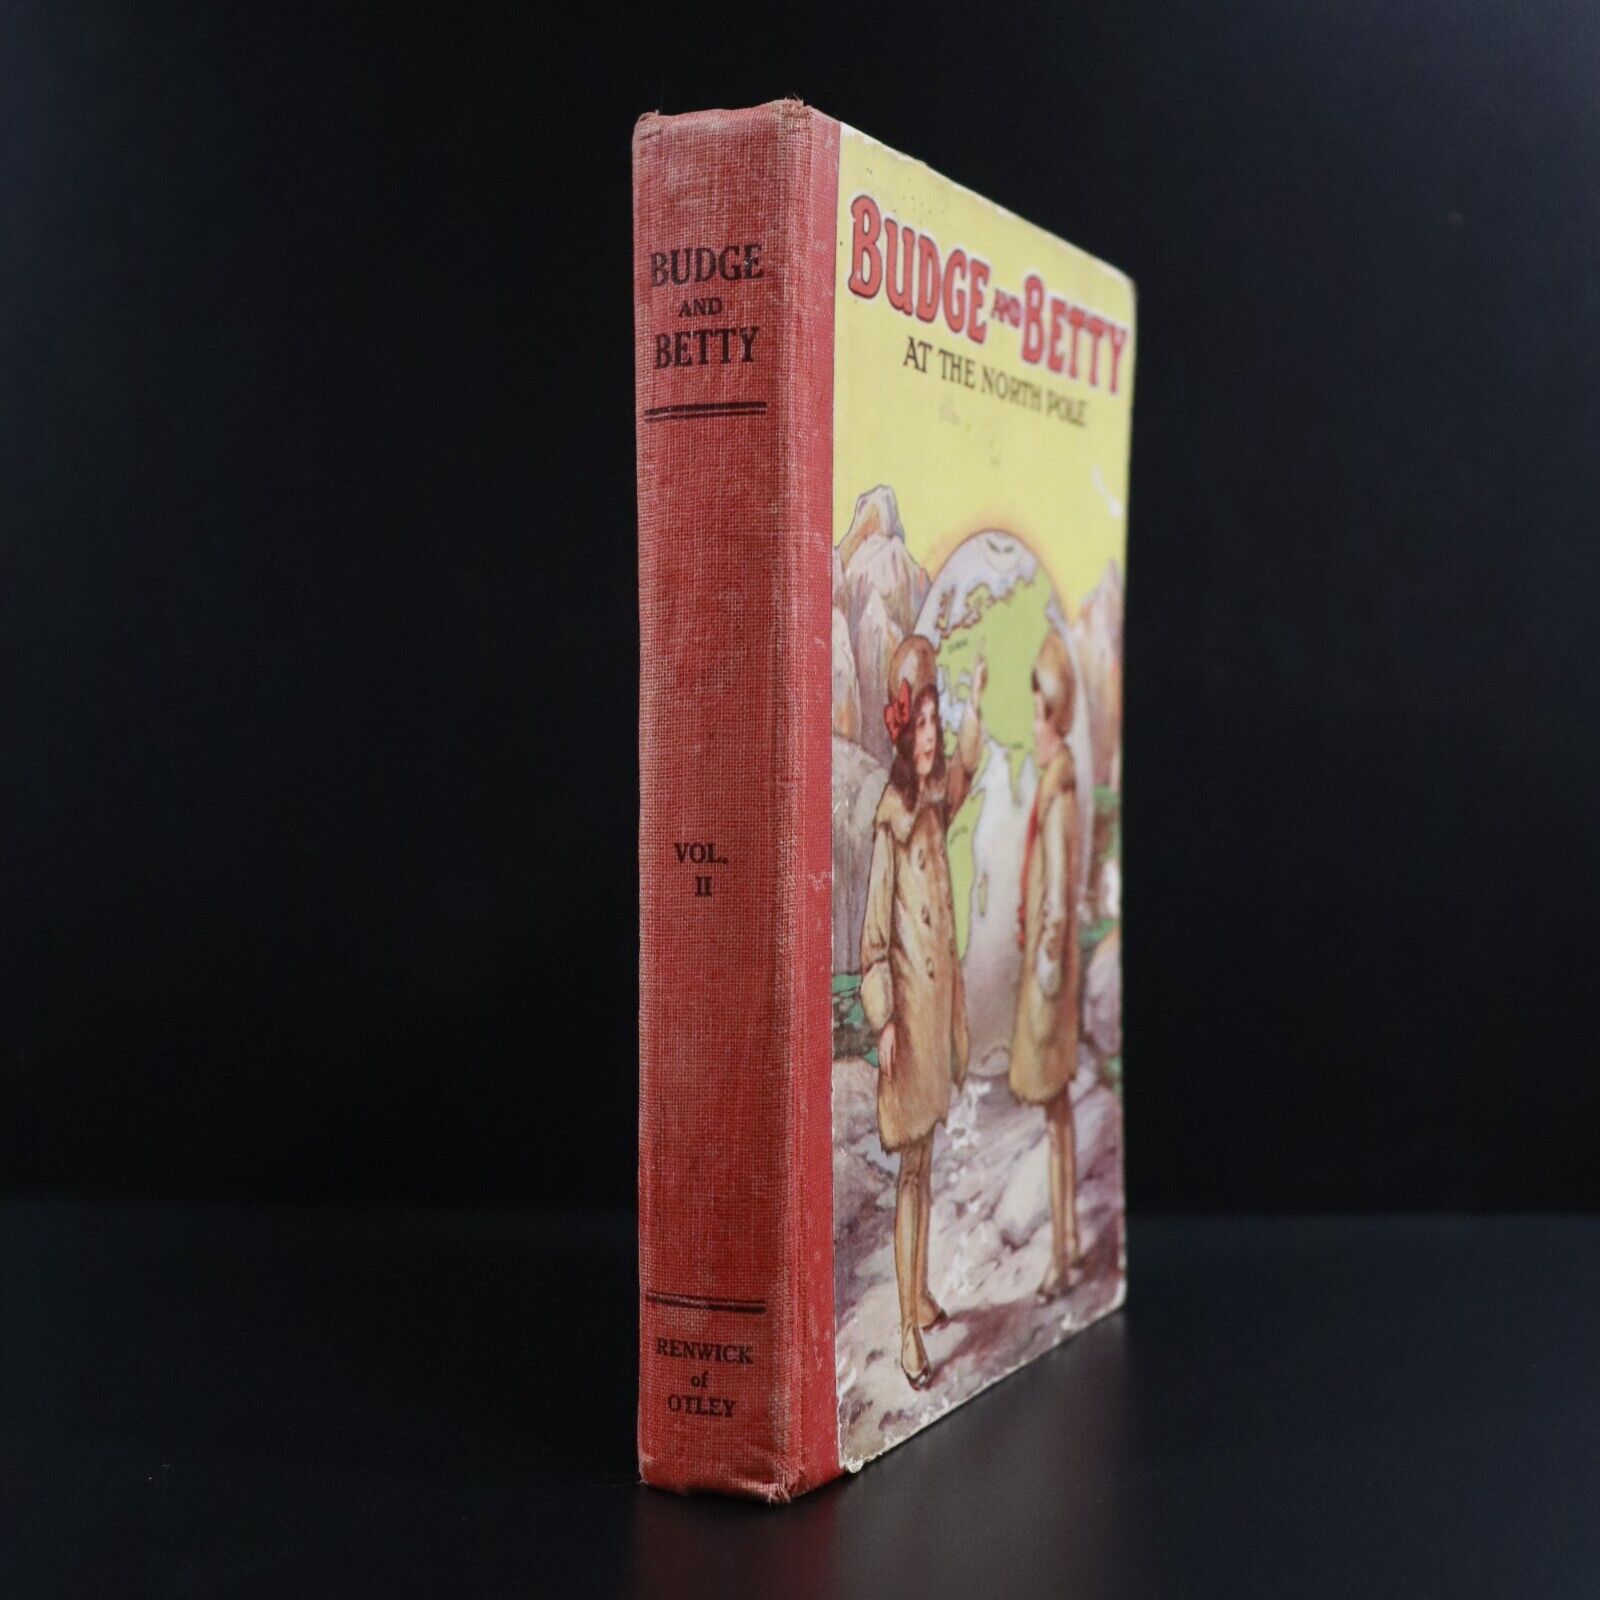 Budge & Betty At The North Pole - c1935 - Antique Childrens Book